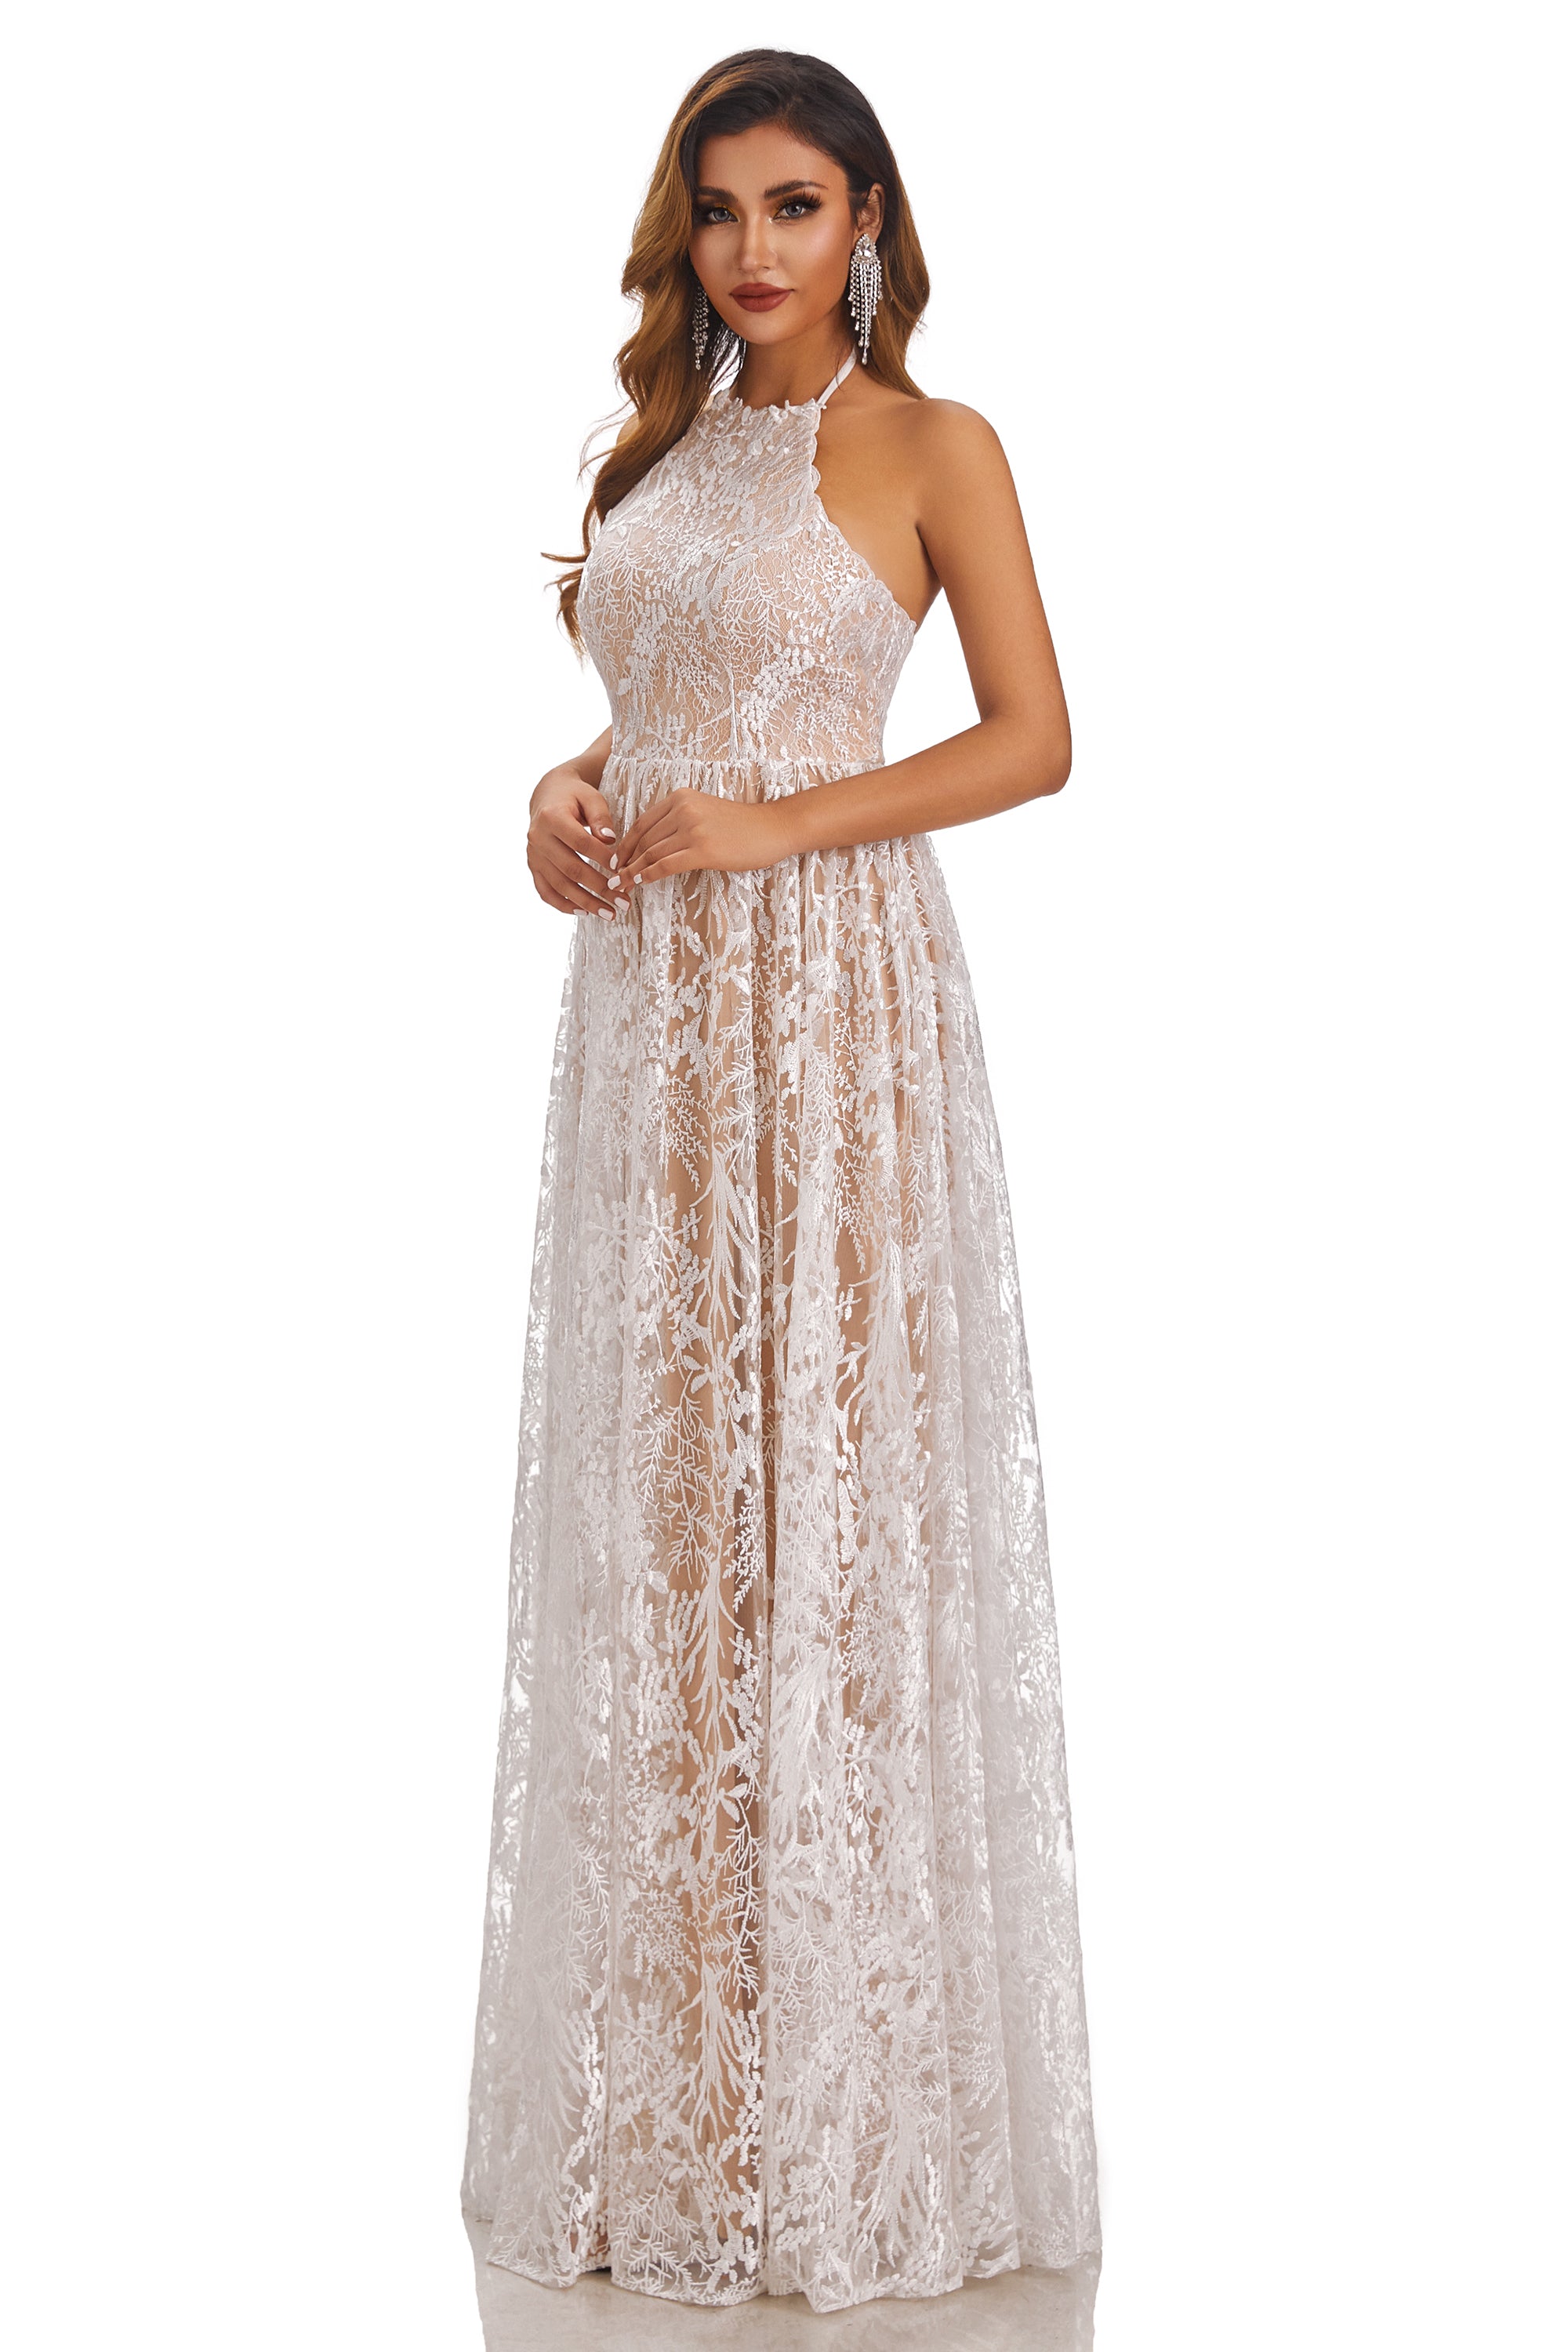 A-Line Long Halter Sleeveless Lace Up Wedding Dress With Lace Appliques